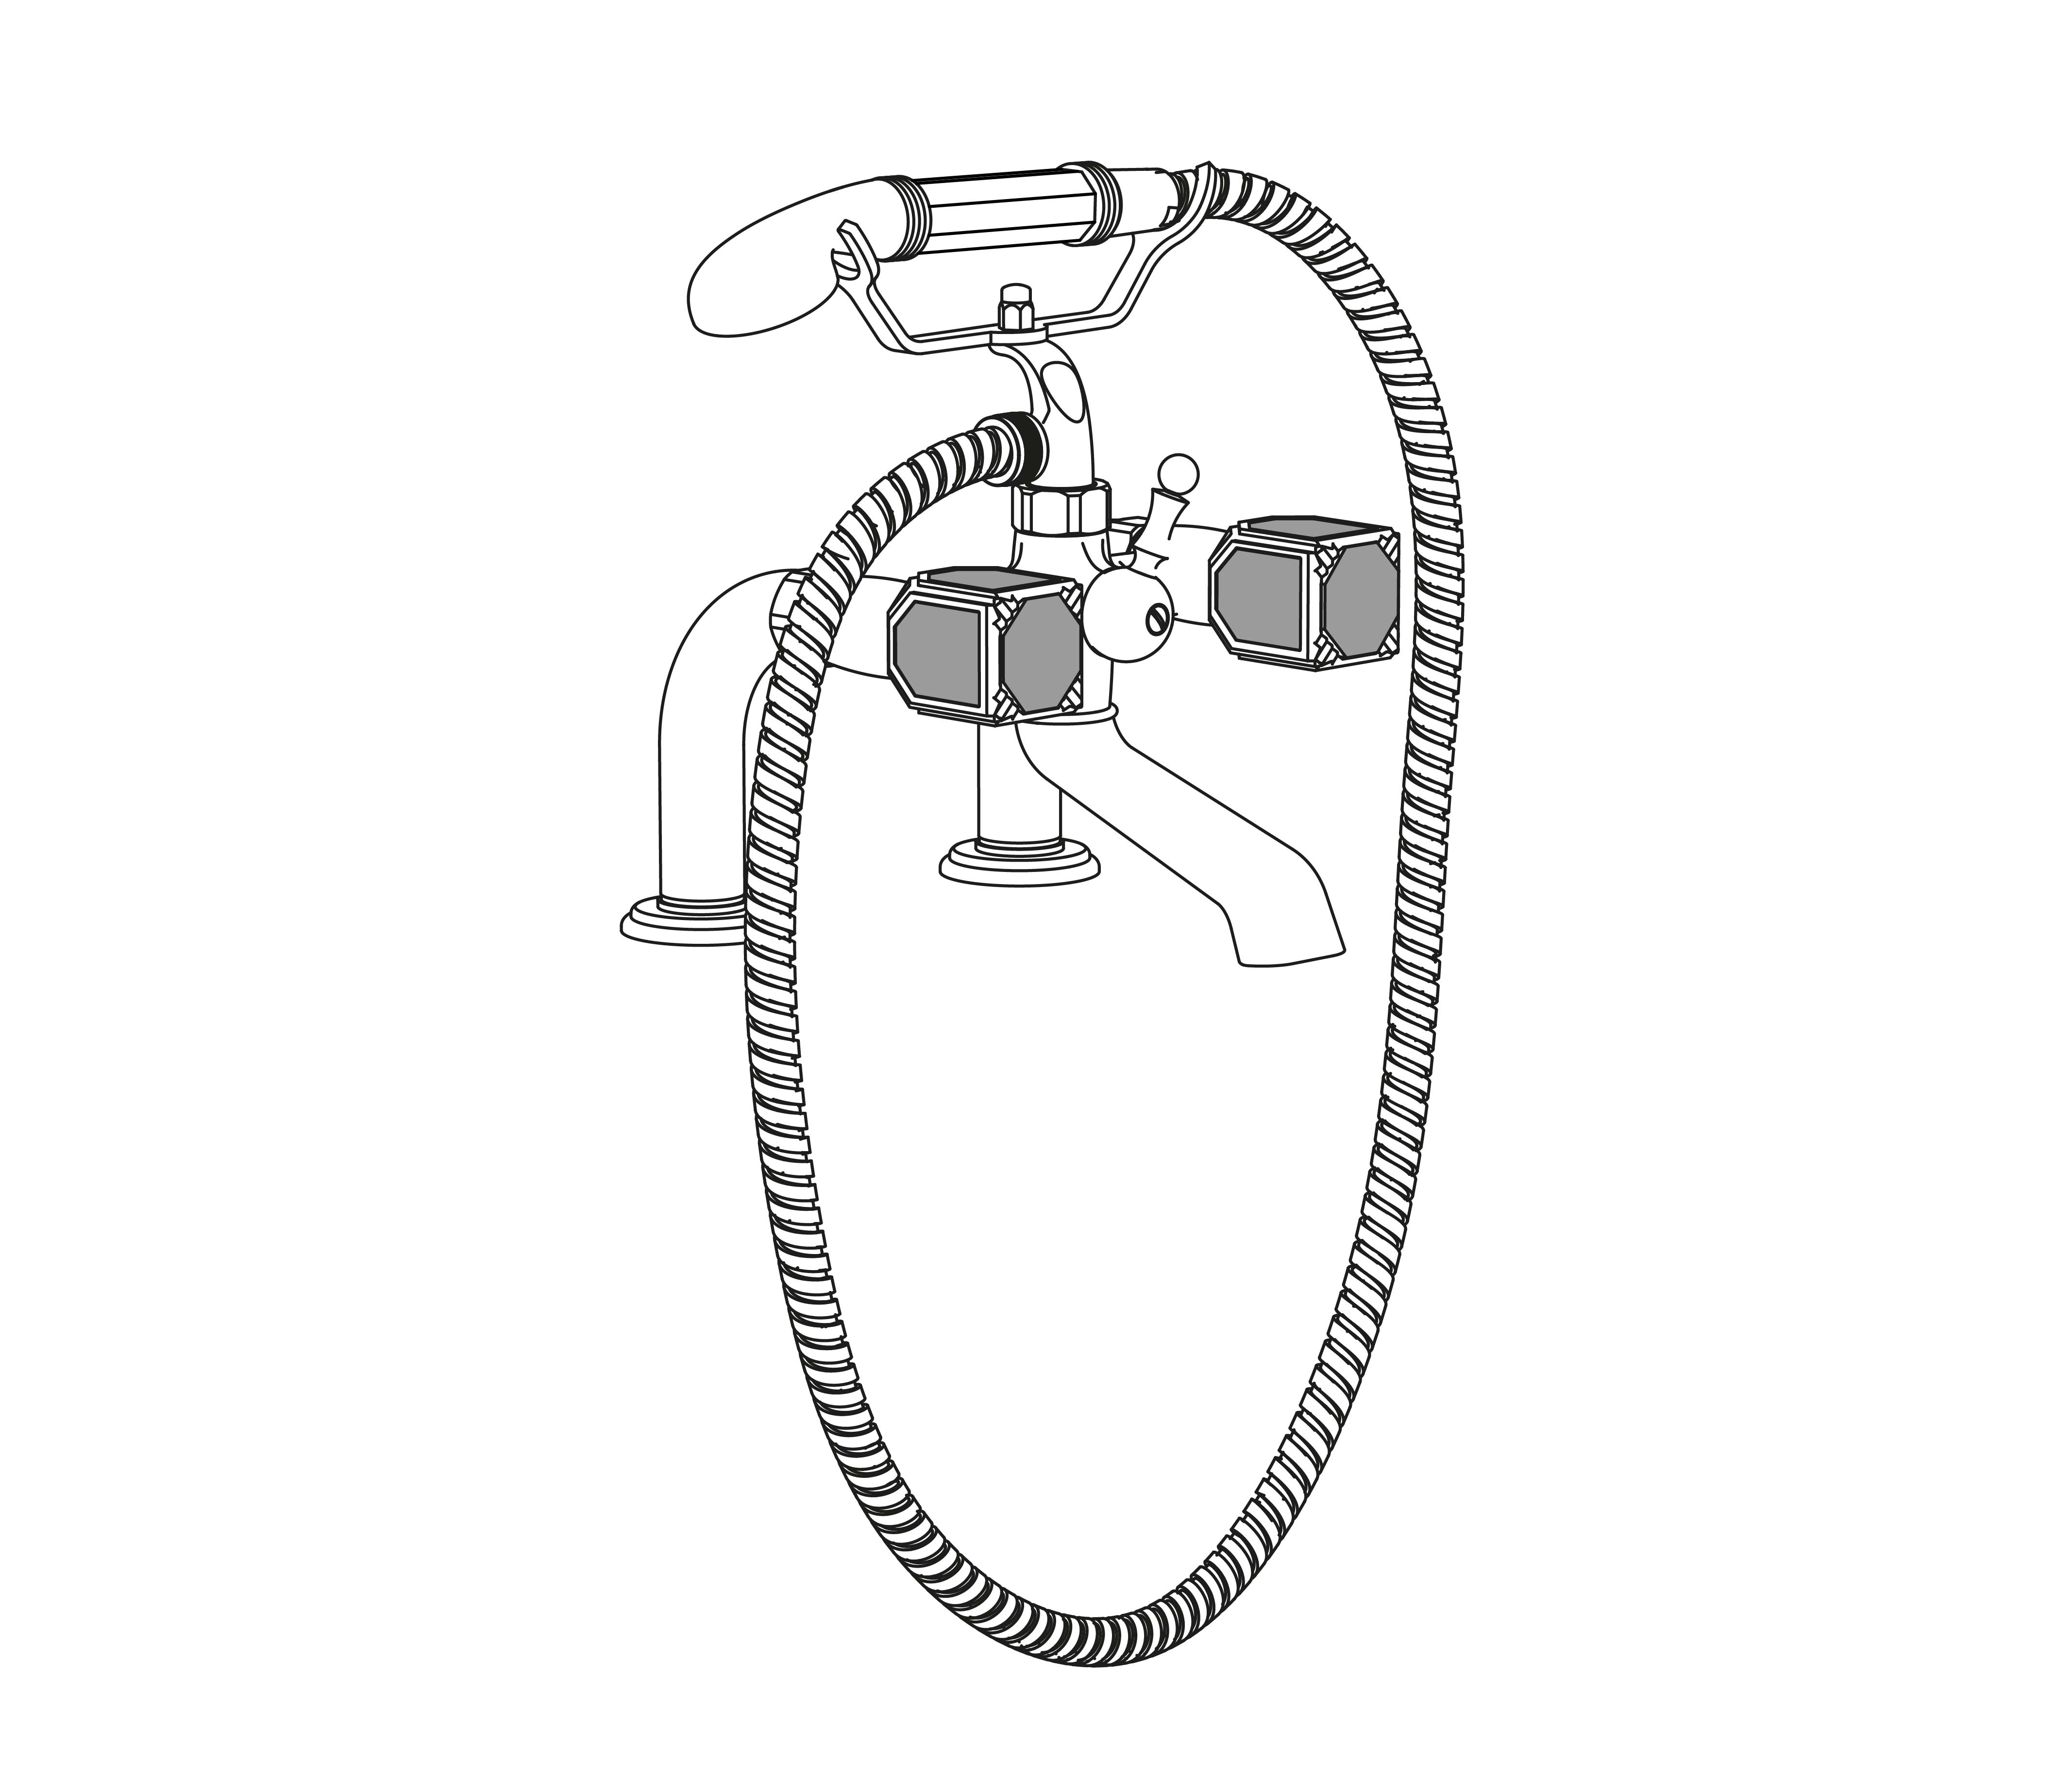 S68-3306 Rim mounted bath and shower mixer